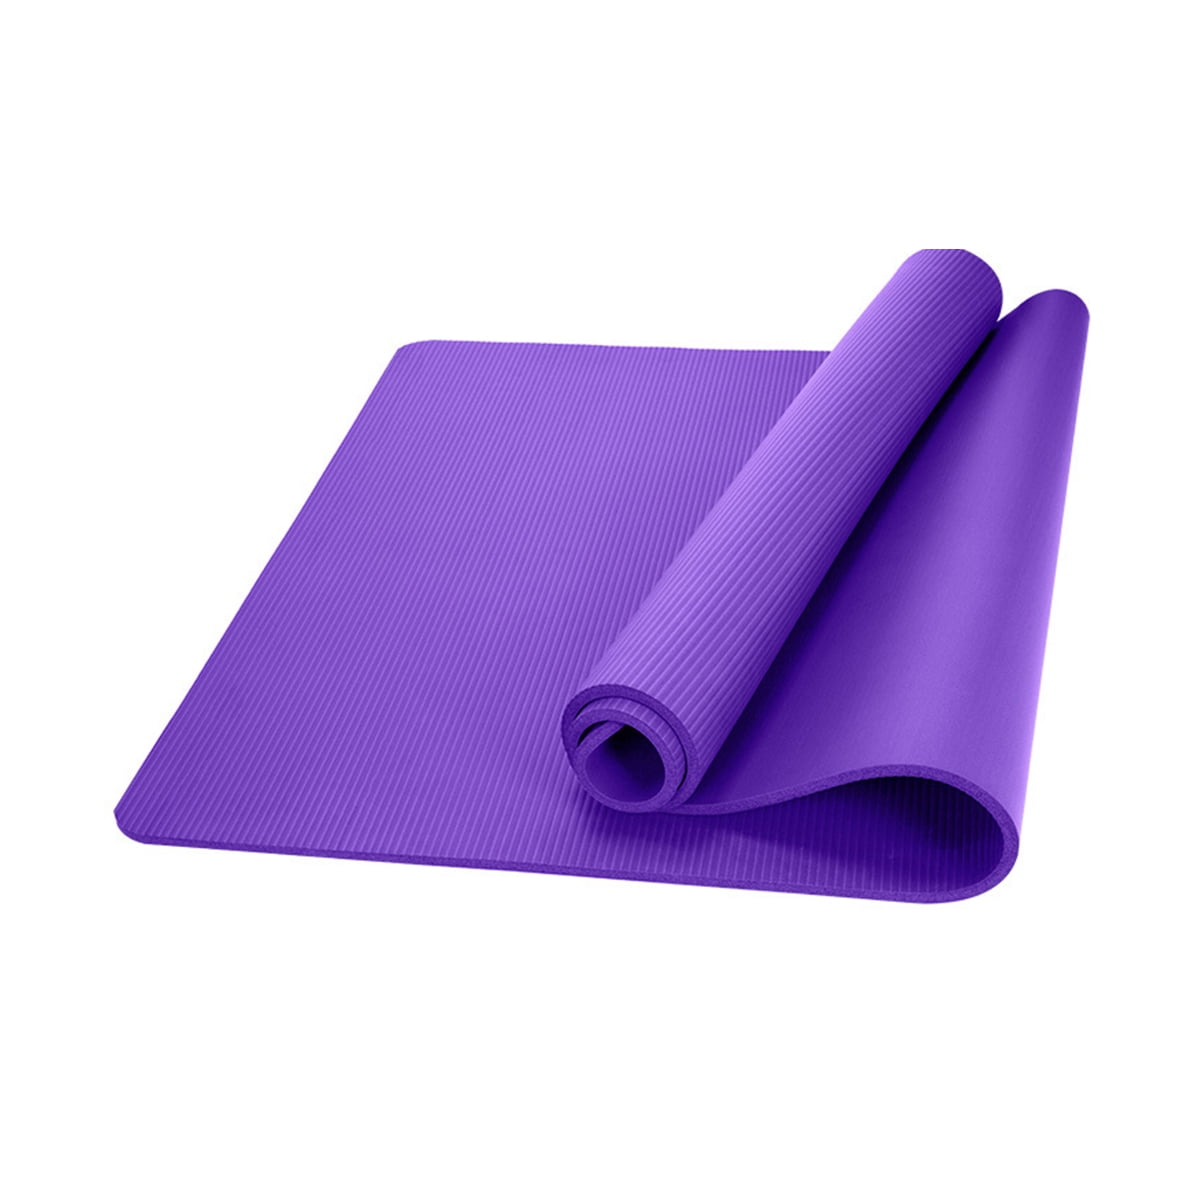 Anti Slip Cheap Yoga Mats For Women Ideal For Gymnastics, Fitness, And  Weight Loss From Yuanmu23, $33.2